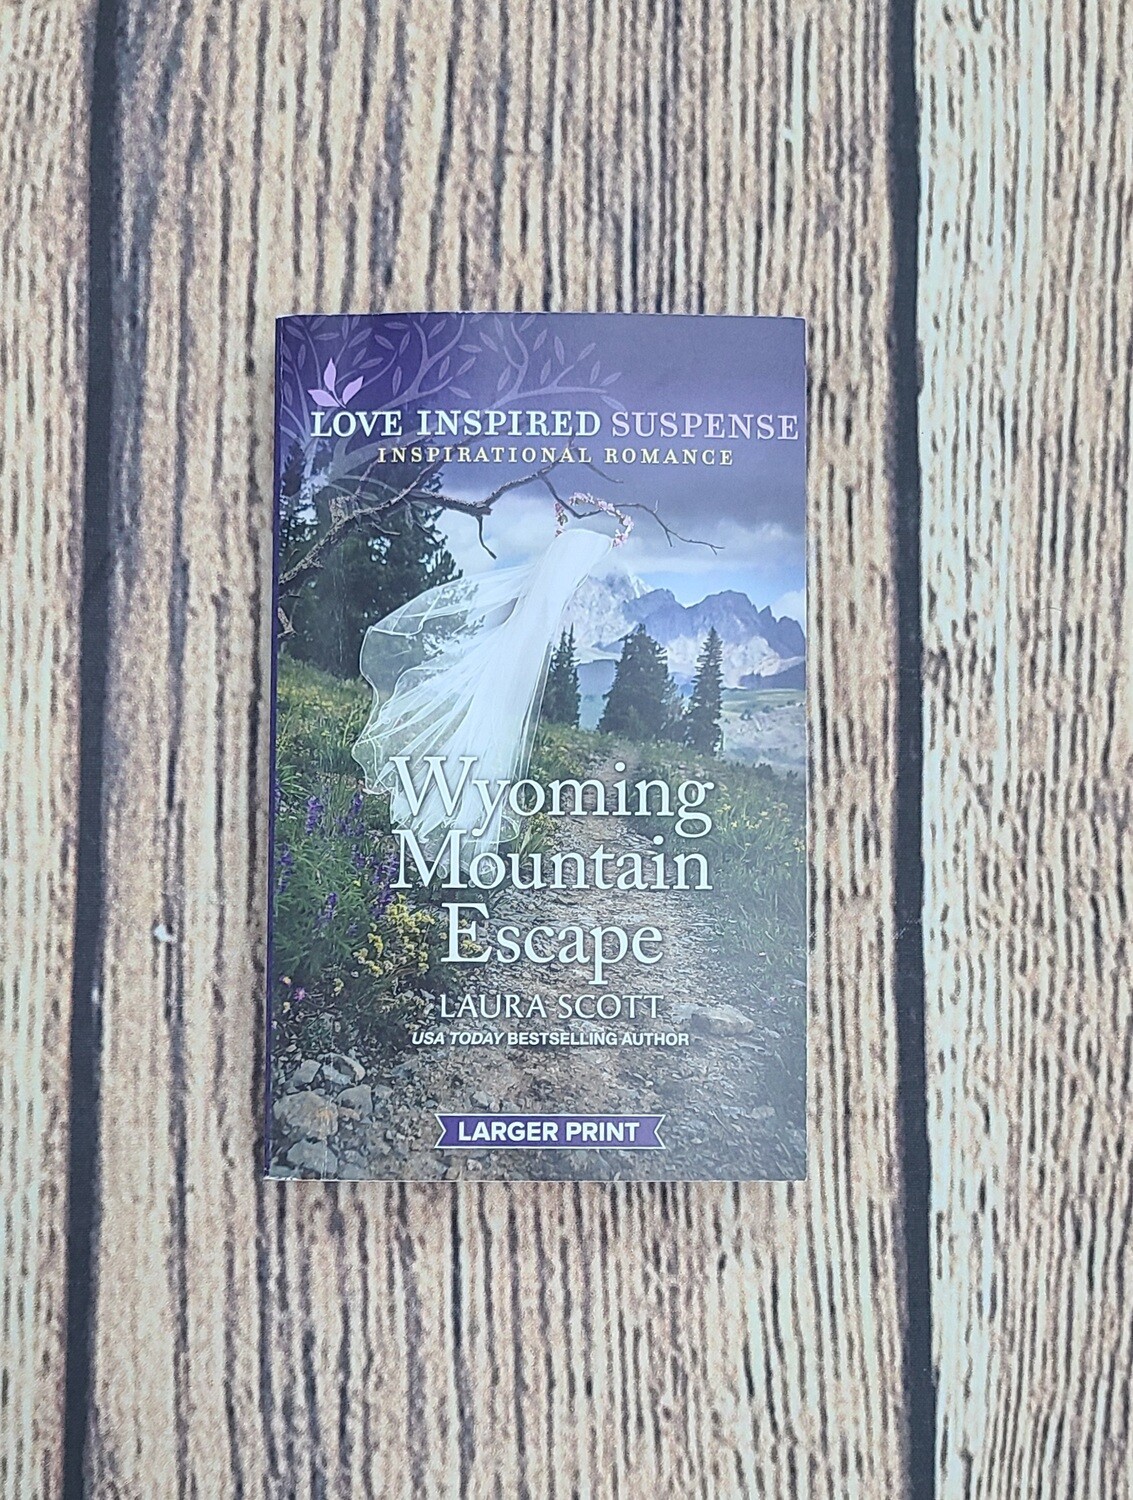 Wyoming Mountain Escape by Laura Scott - Great Condition